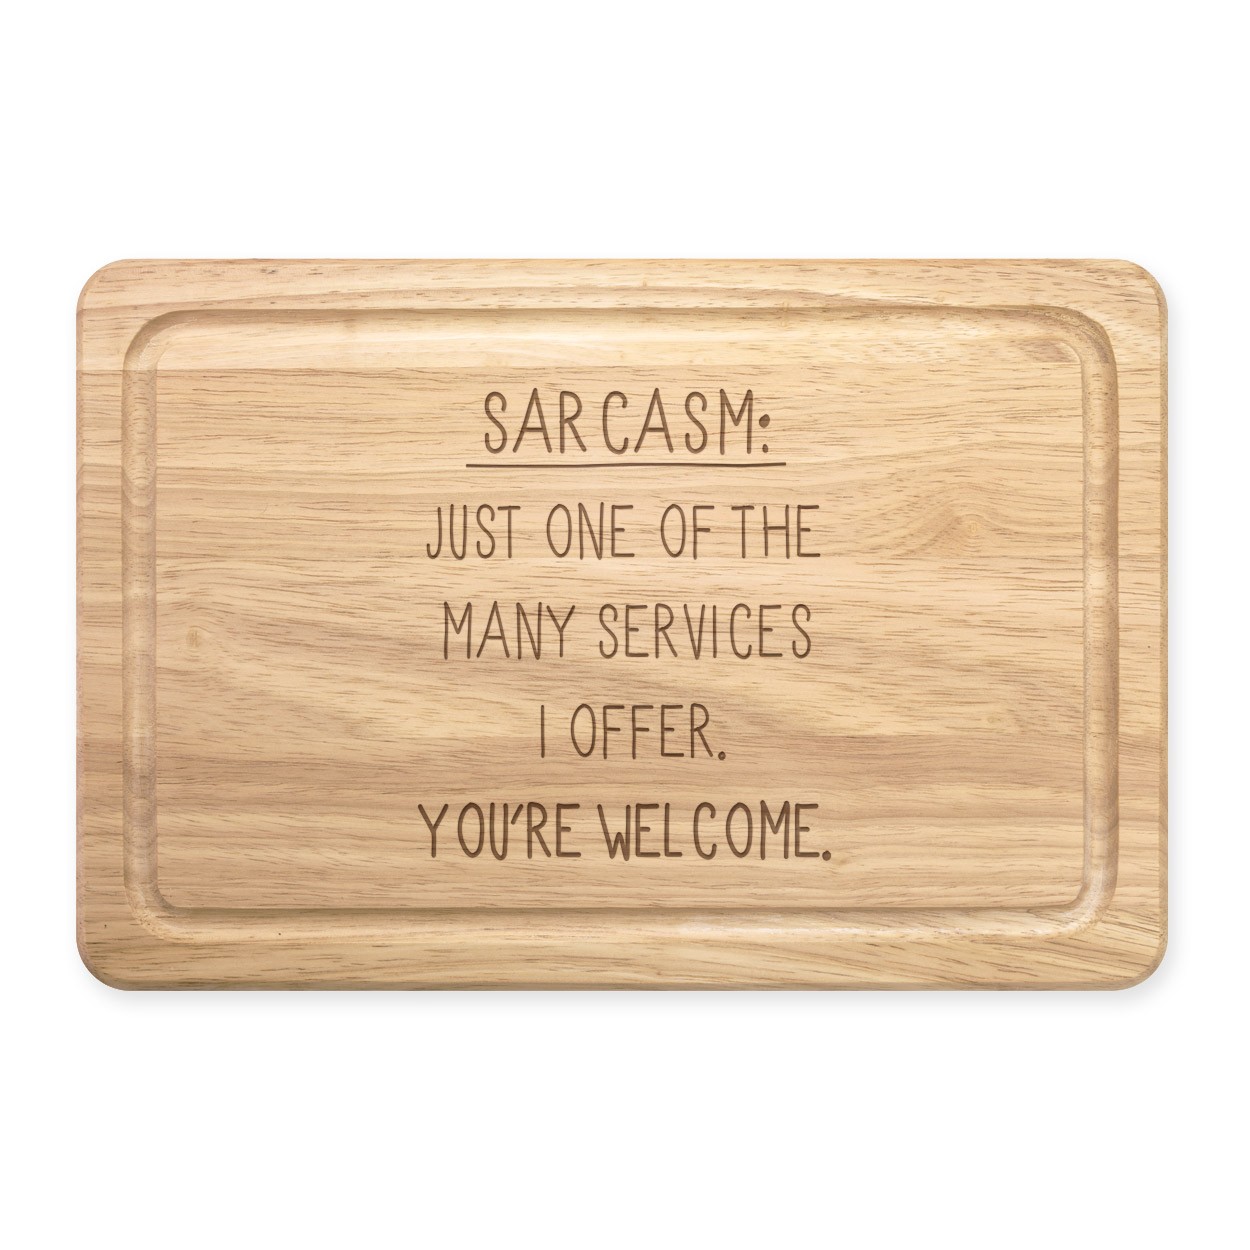 Sarcasm One Of The Many Services Rectangular Wooden Chopping Board